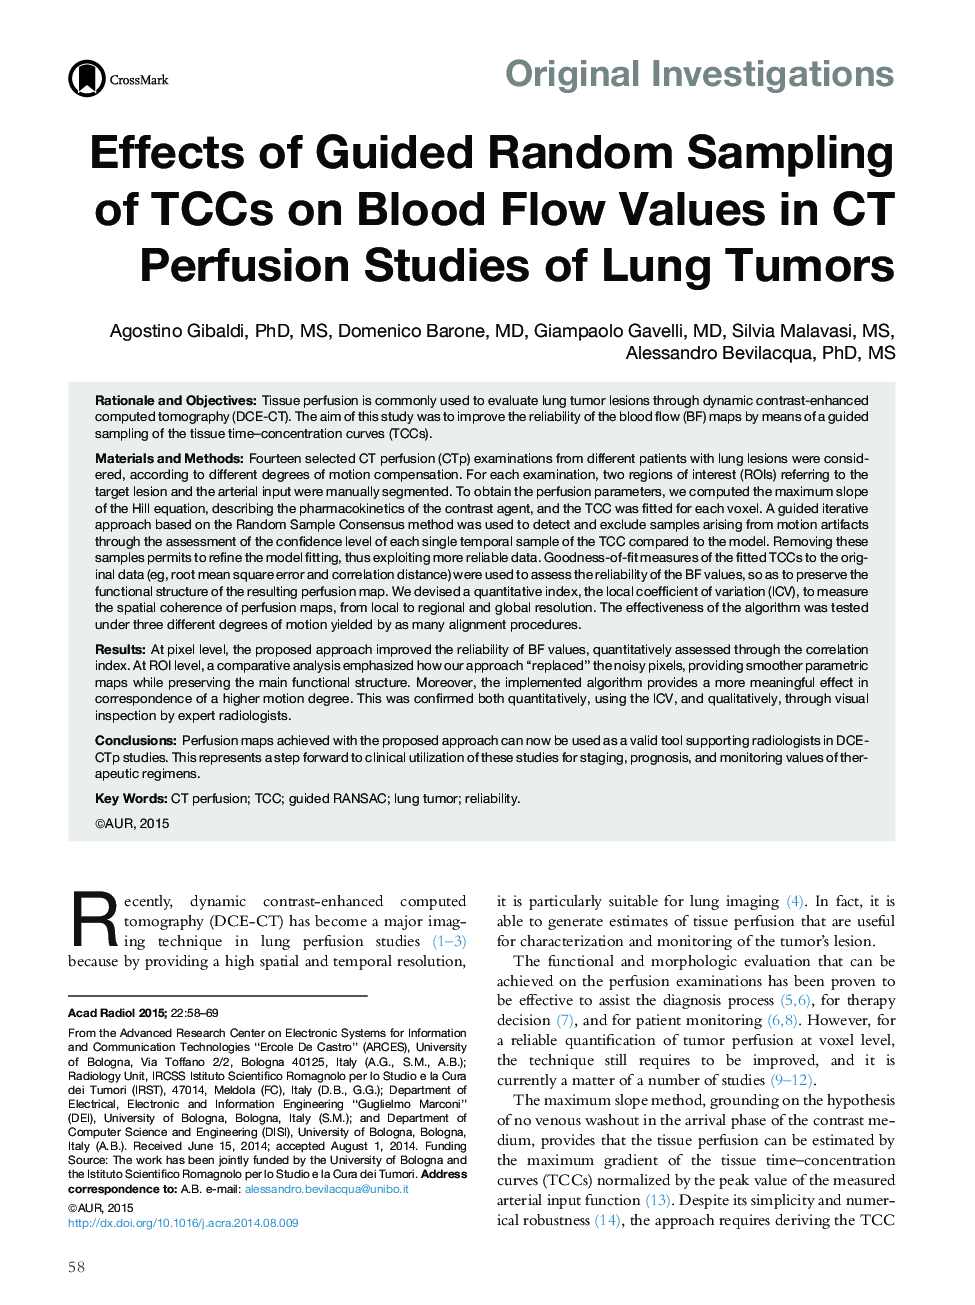 Effects of Guided Random Sampling of TCCs on Blood Flow Values in CT Perfusion Studies of Lung Tumors